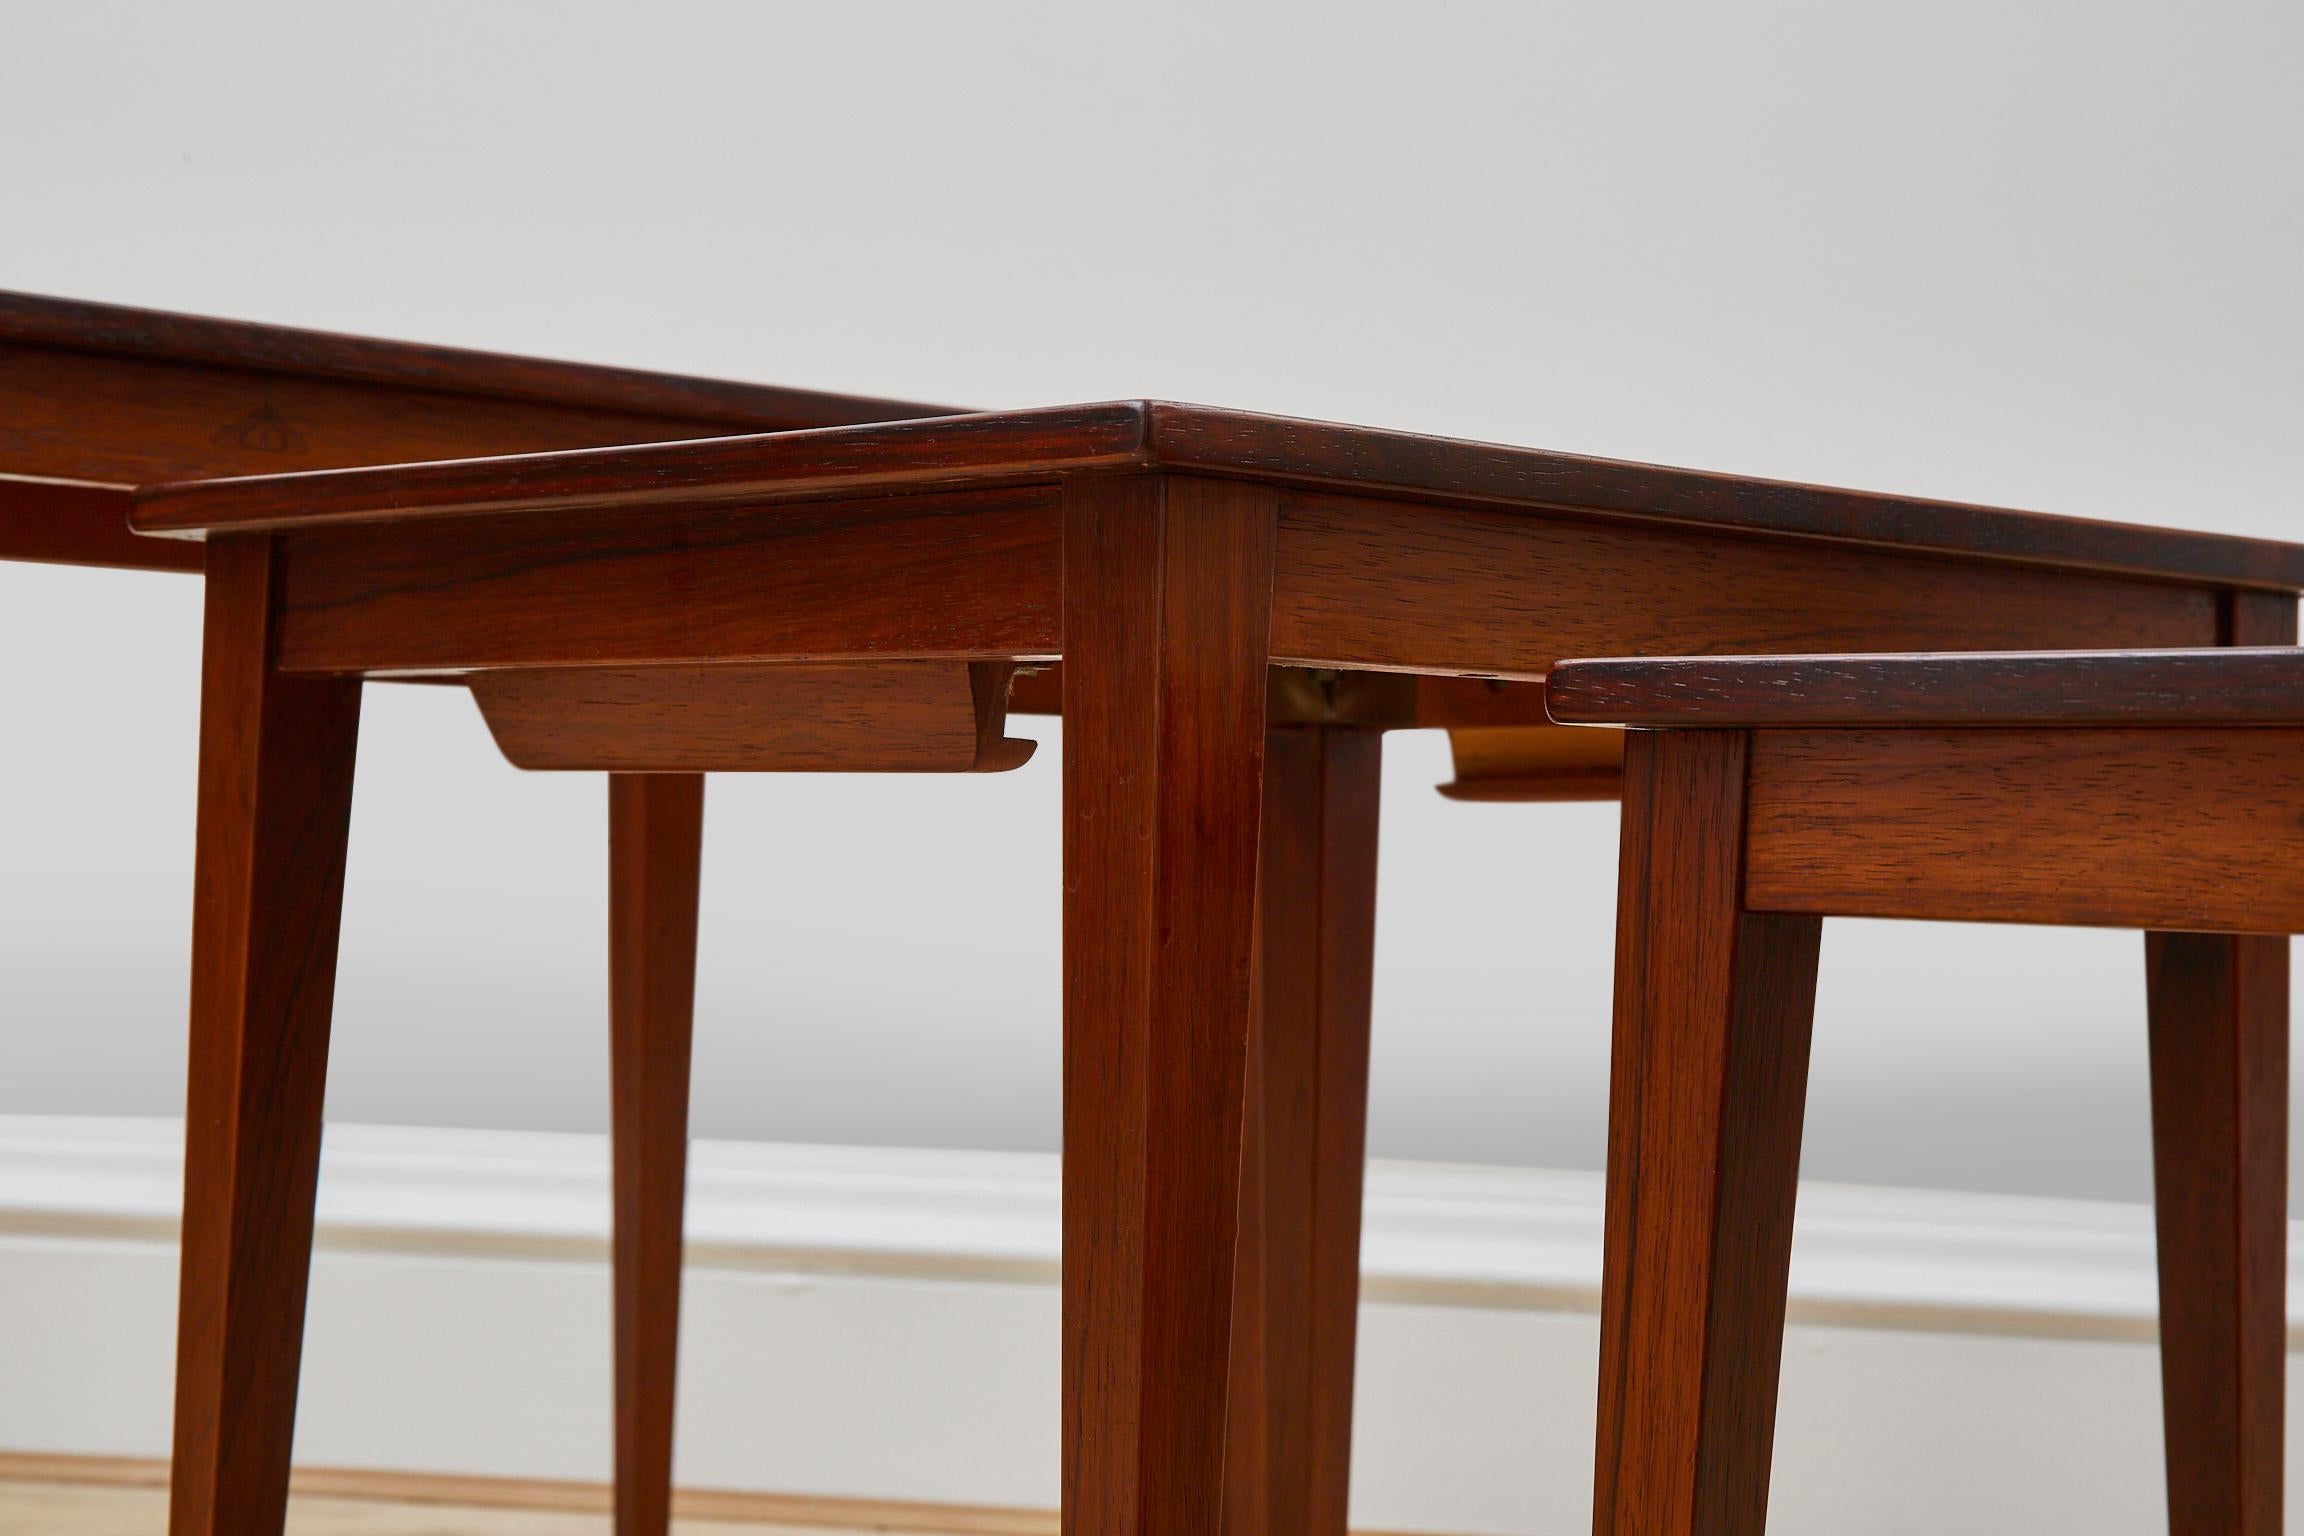 20th Century Nesting Tables in Rosewood. Made in Denmark 1960's